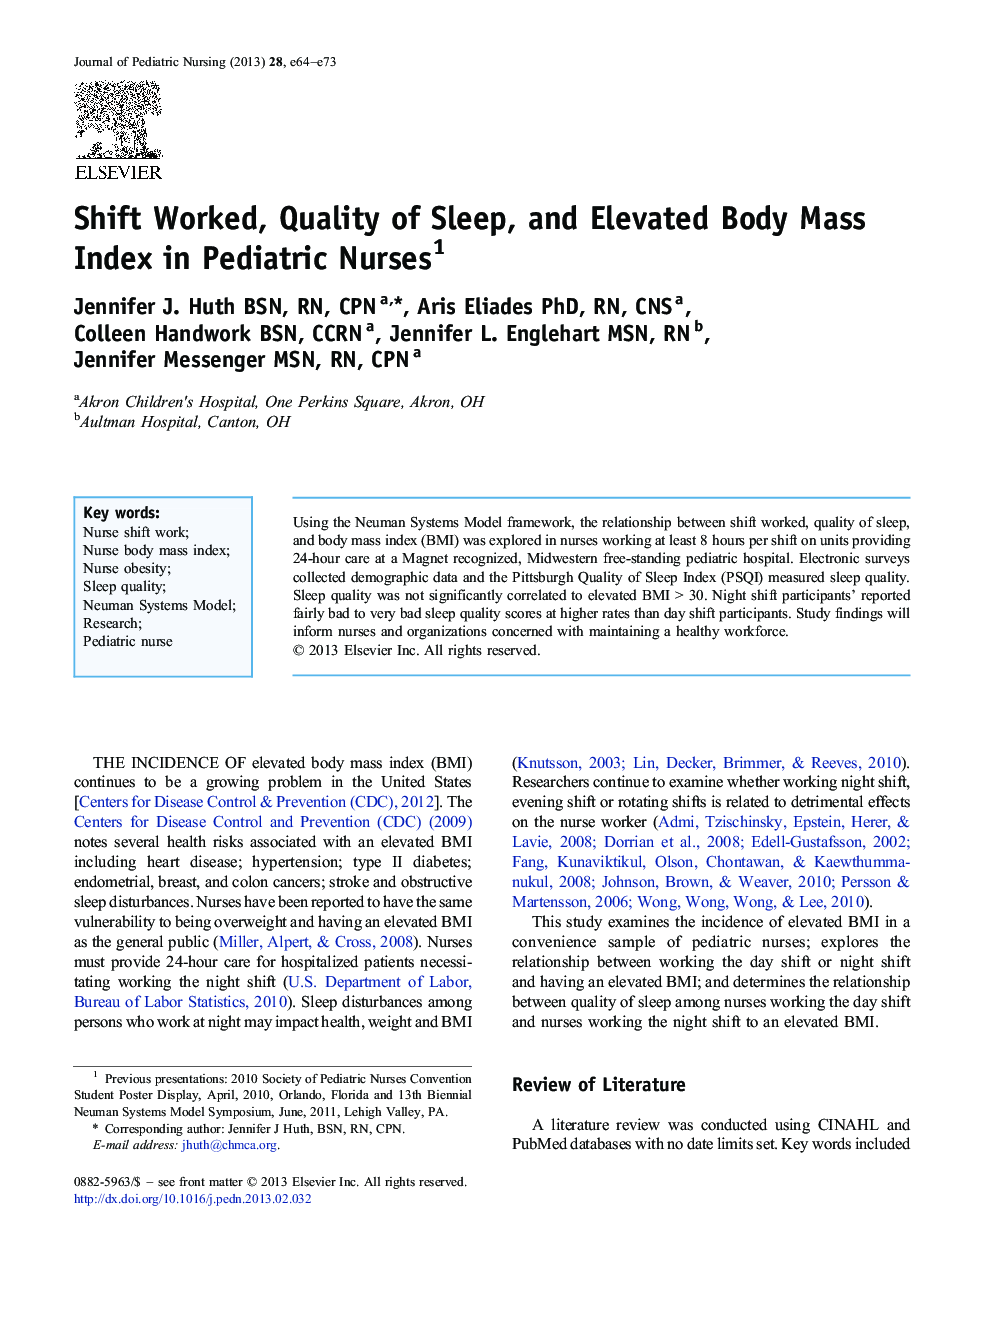 Shift Worked, Quality of Sleep, and Elevated Body Mass Index in Pediatric Nurses 1